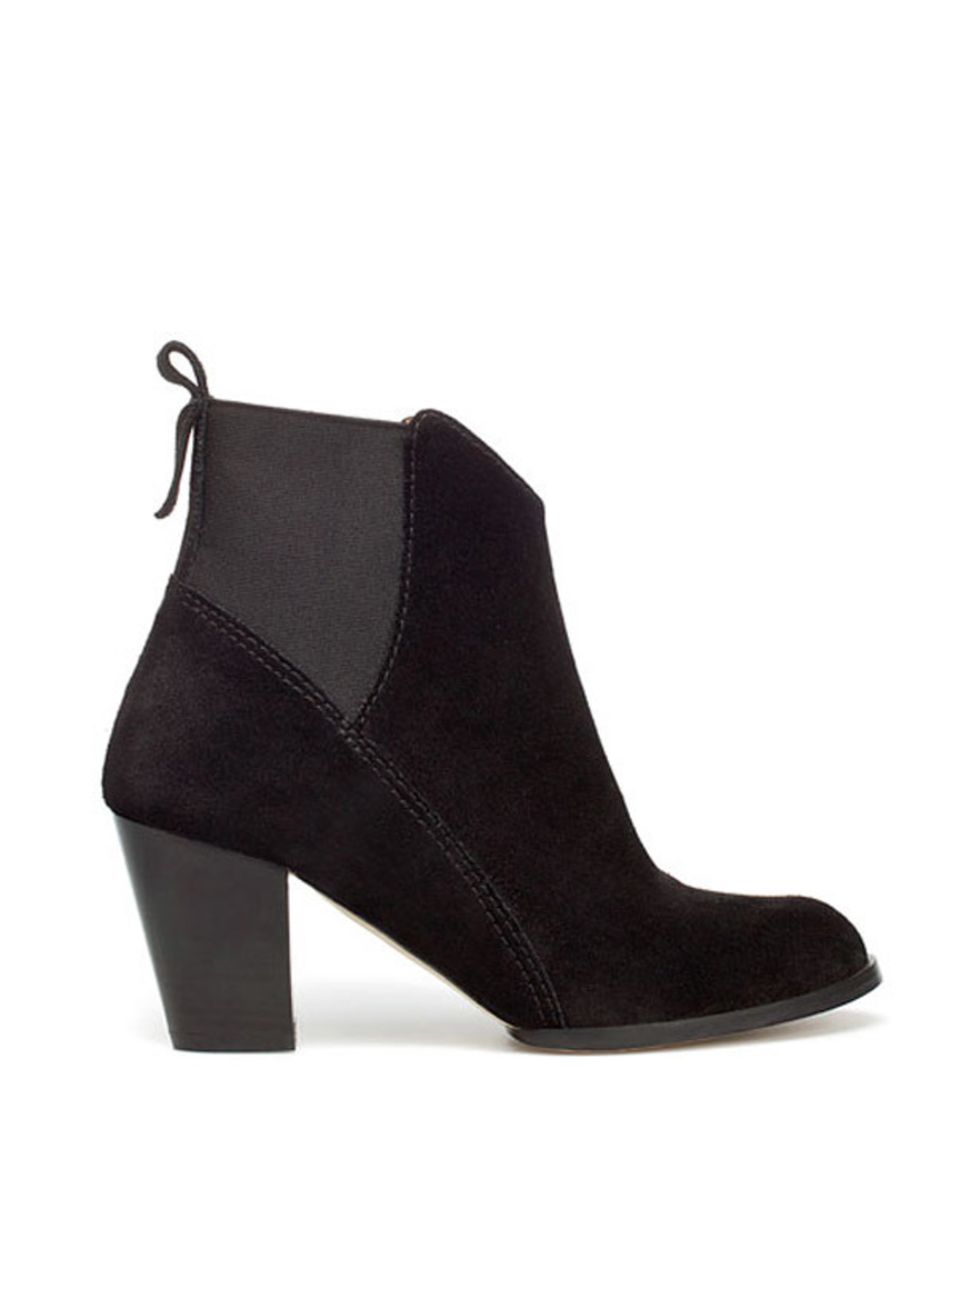 <p>Are you embarking on the perennial boot hunt? Look no further than this pair from Zara <a href="http://www.zara.com/webapp/wcs/stores/servlet/product/uk/en/zara-W2011/118149/586502">Zara</a> ankle boots, £69.99,</p>